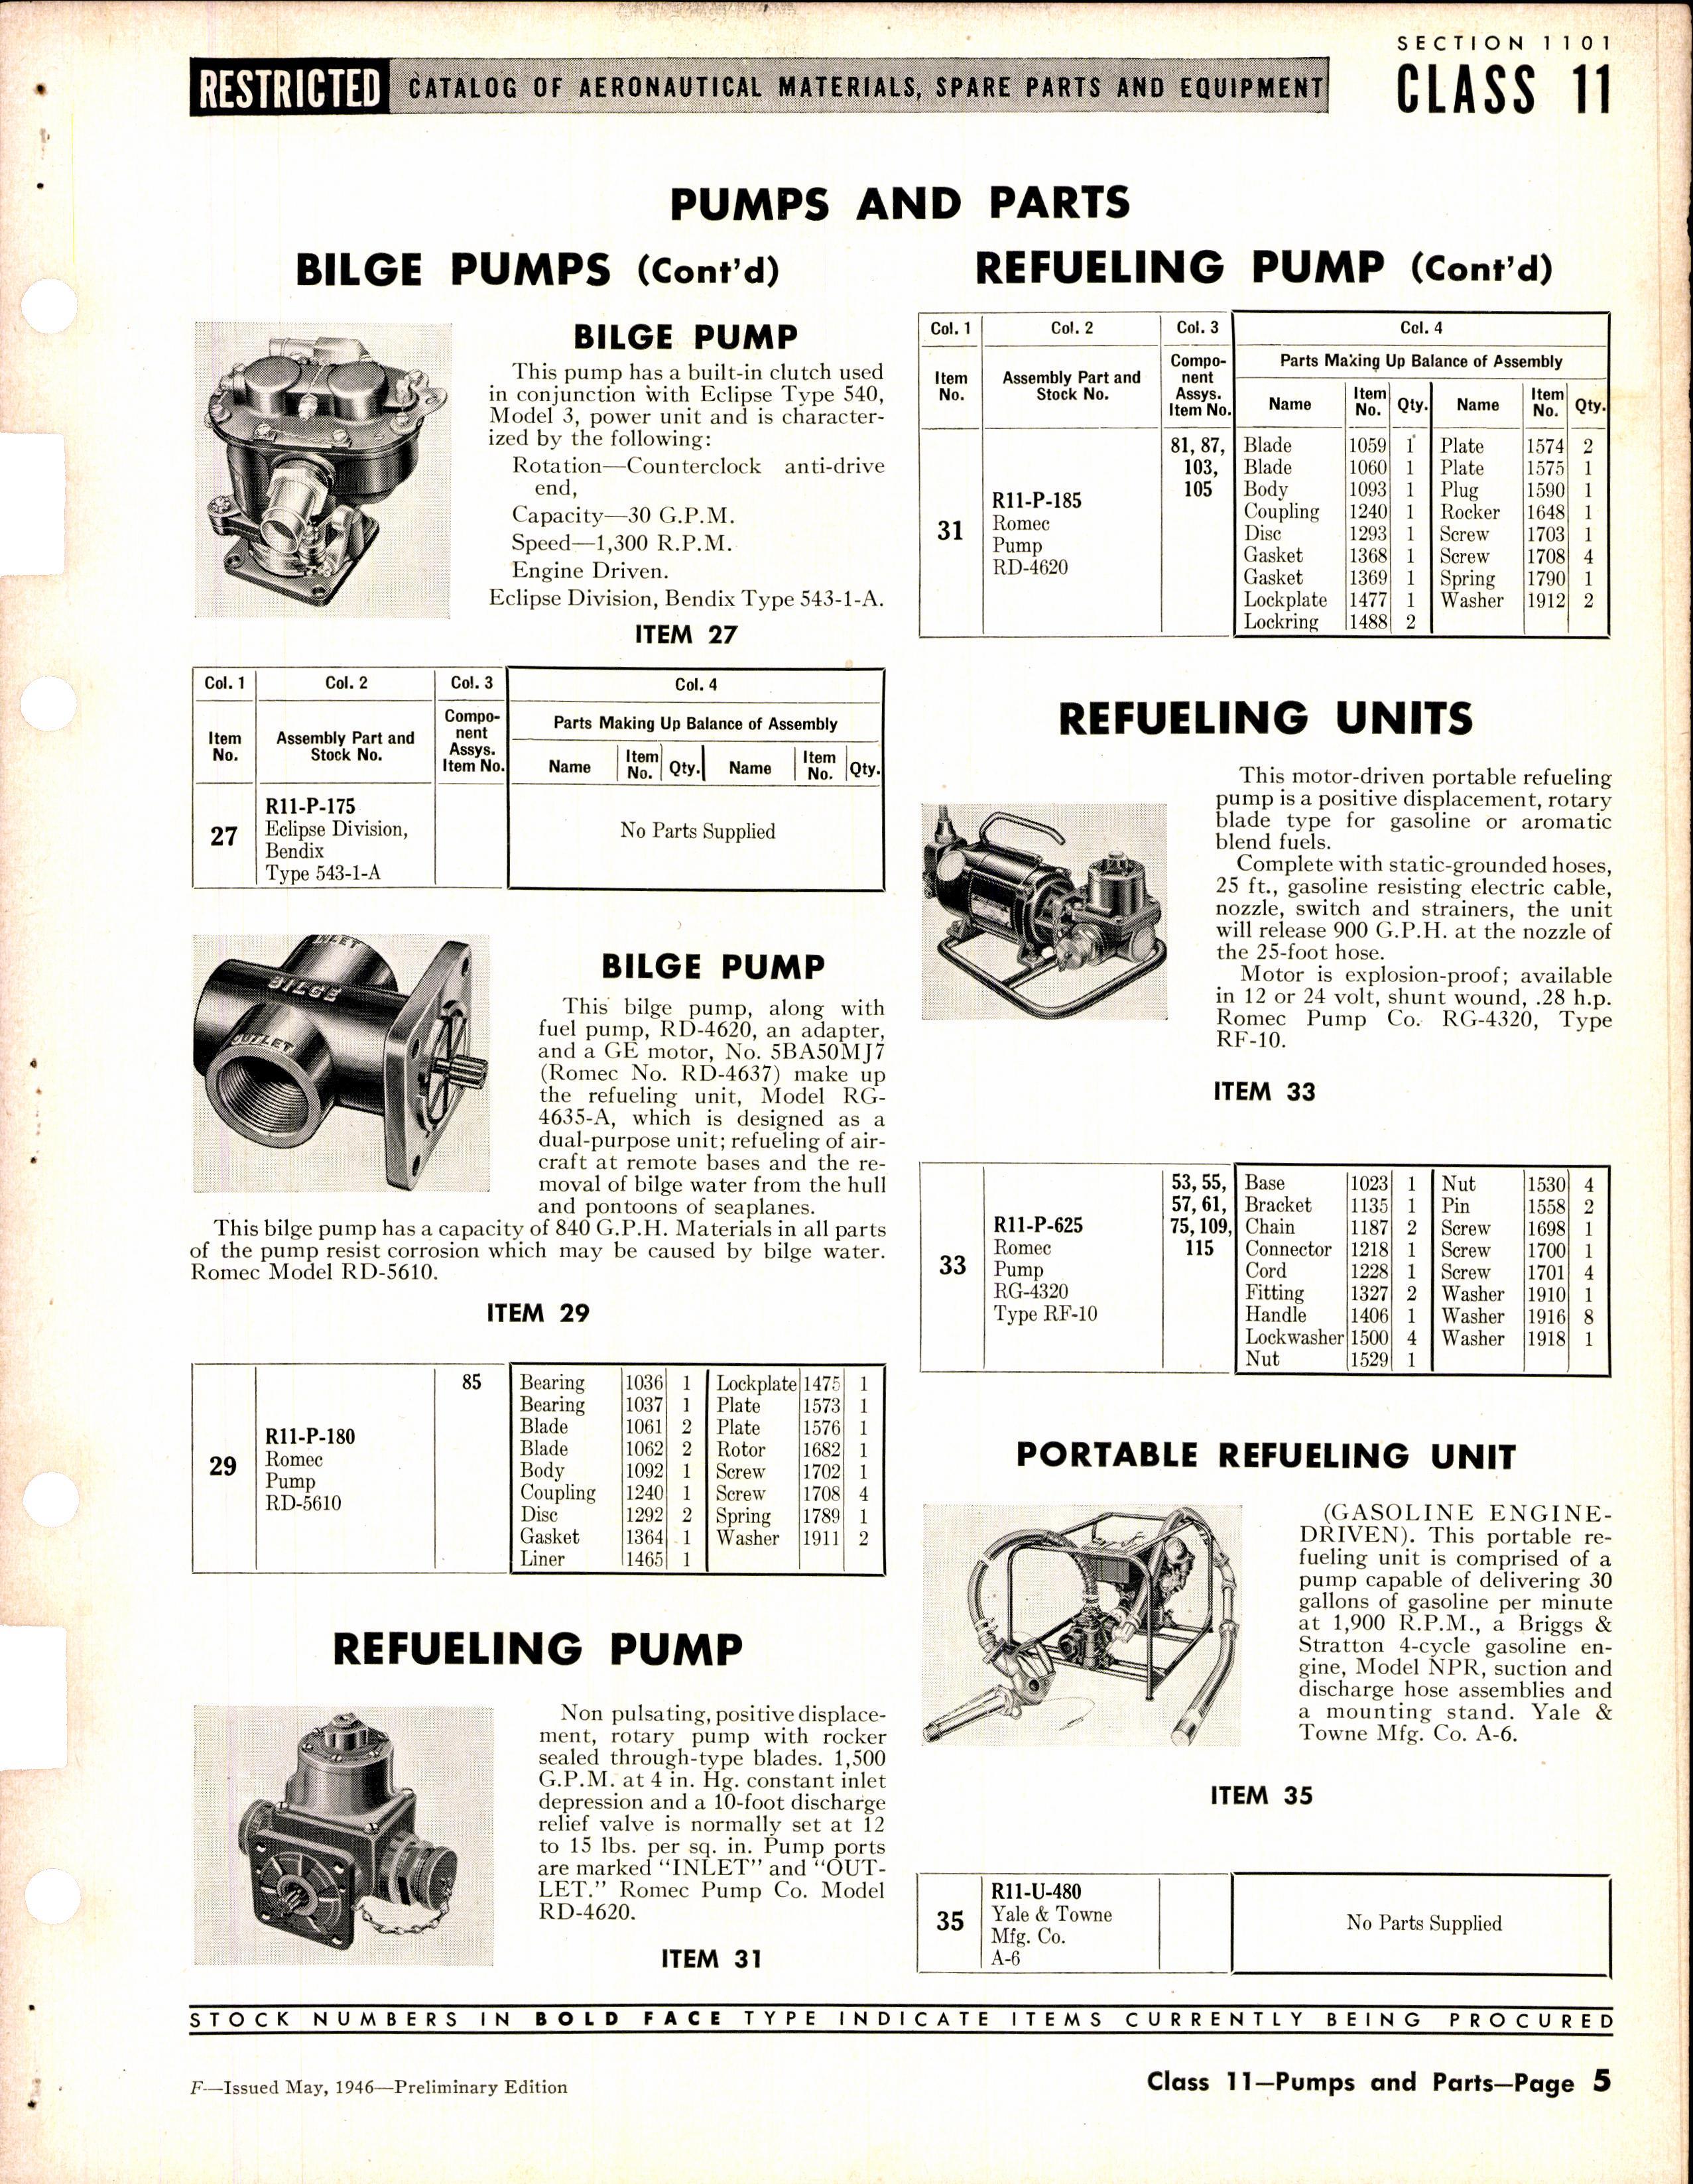 Sample page 5 from AirCorps Library document: Pumps and Parts